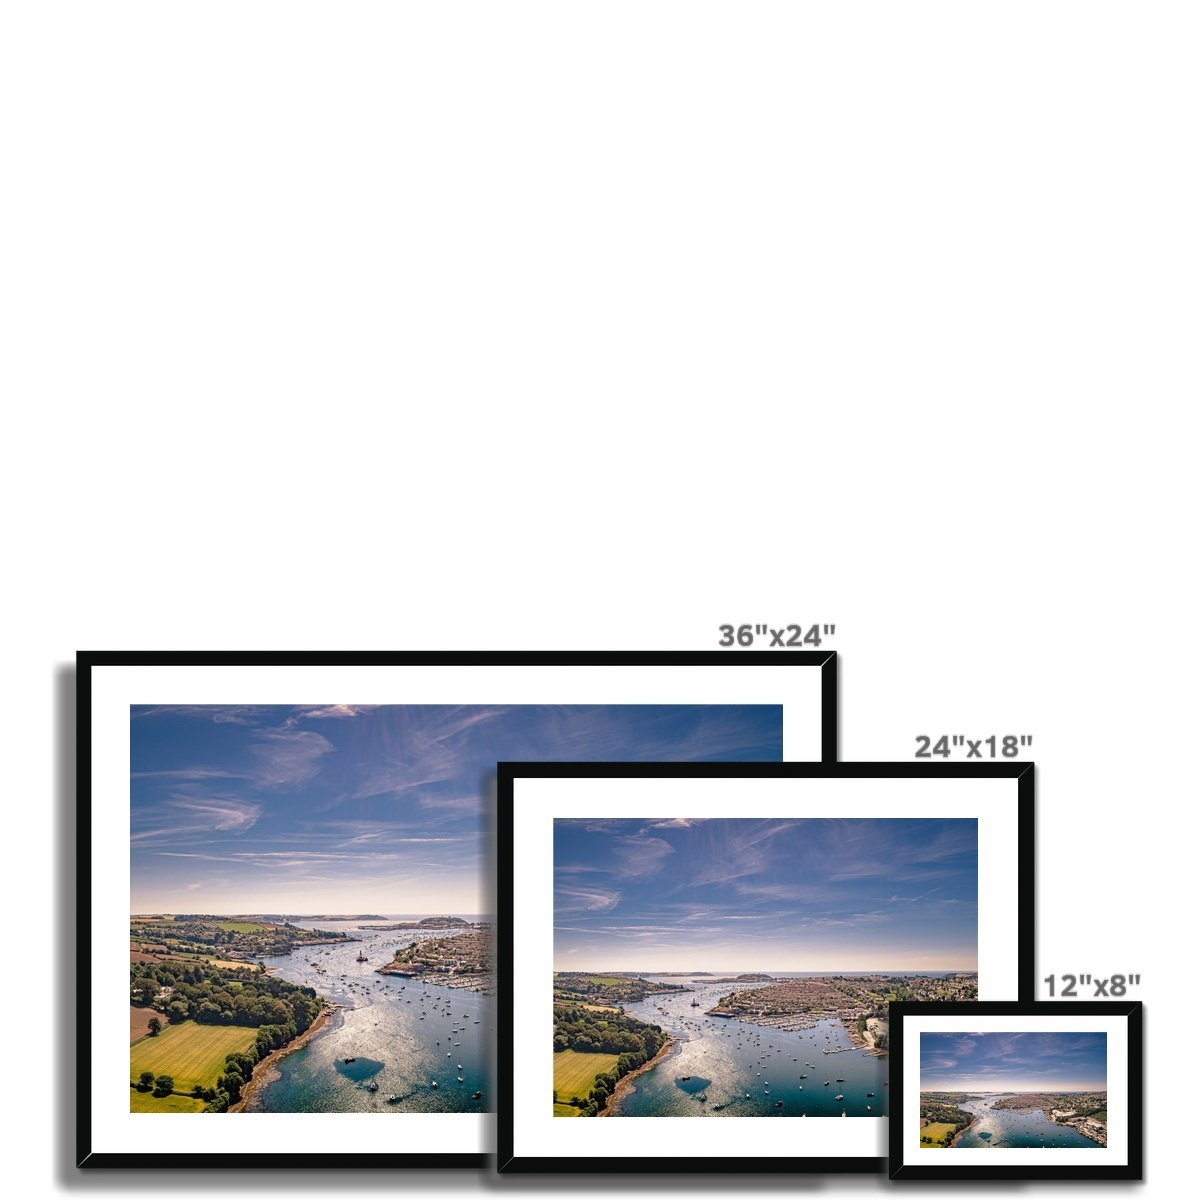 falmouth view to sea wooden frame sizes